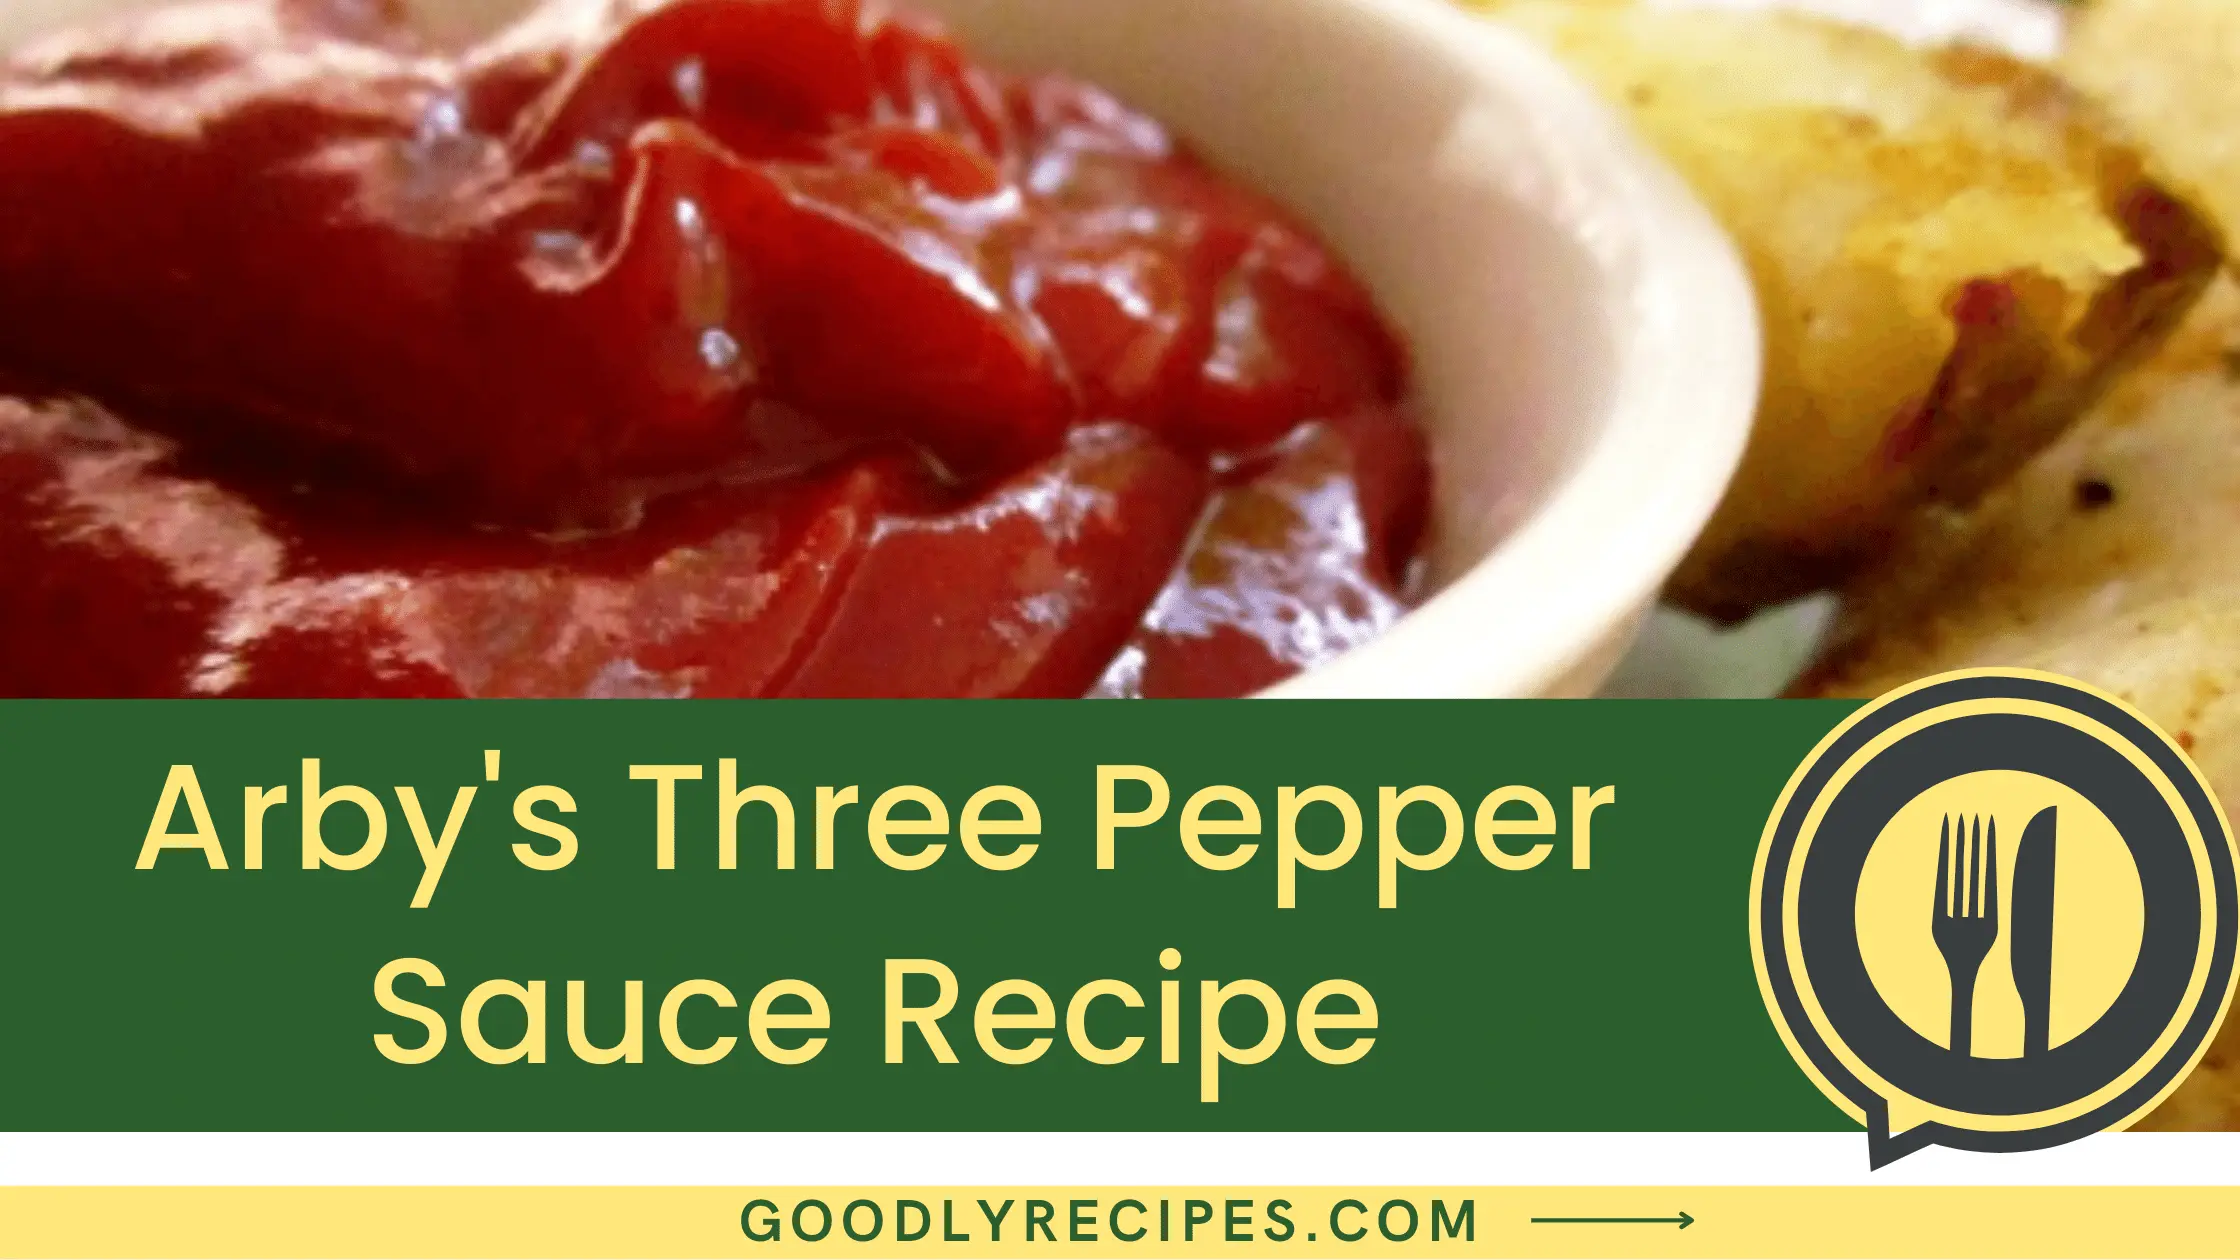 Arby's Three Pepper Sauce Recipe - For Food Lovers